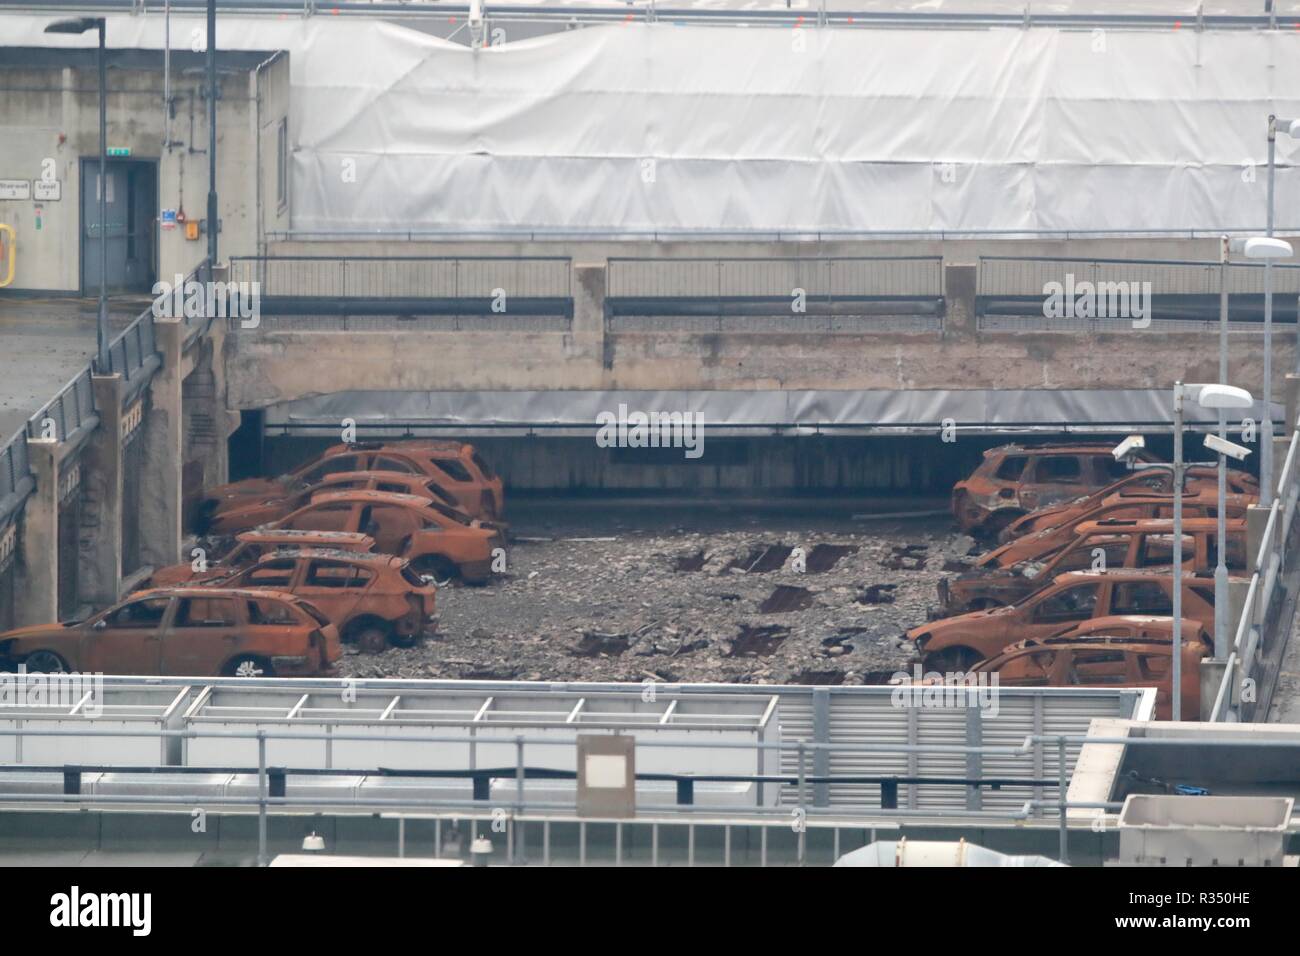 A view of burnt out vehicles on the multi-storey Liverpool Waterfront Car Park near to the Echo Arena which was destroyed by fire on New YearÕs Eve 2017. Work starts on Wednesday to remove almost 1200 cars which were caught in the blaze and to demolish the seven-storey car park. Stock Photo